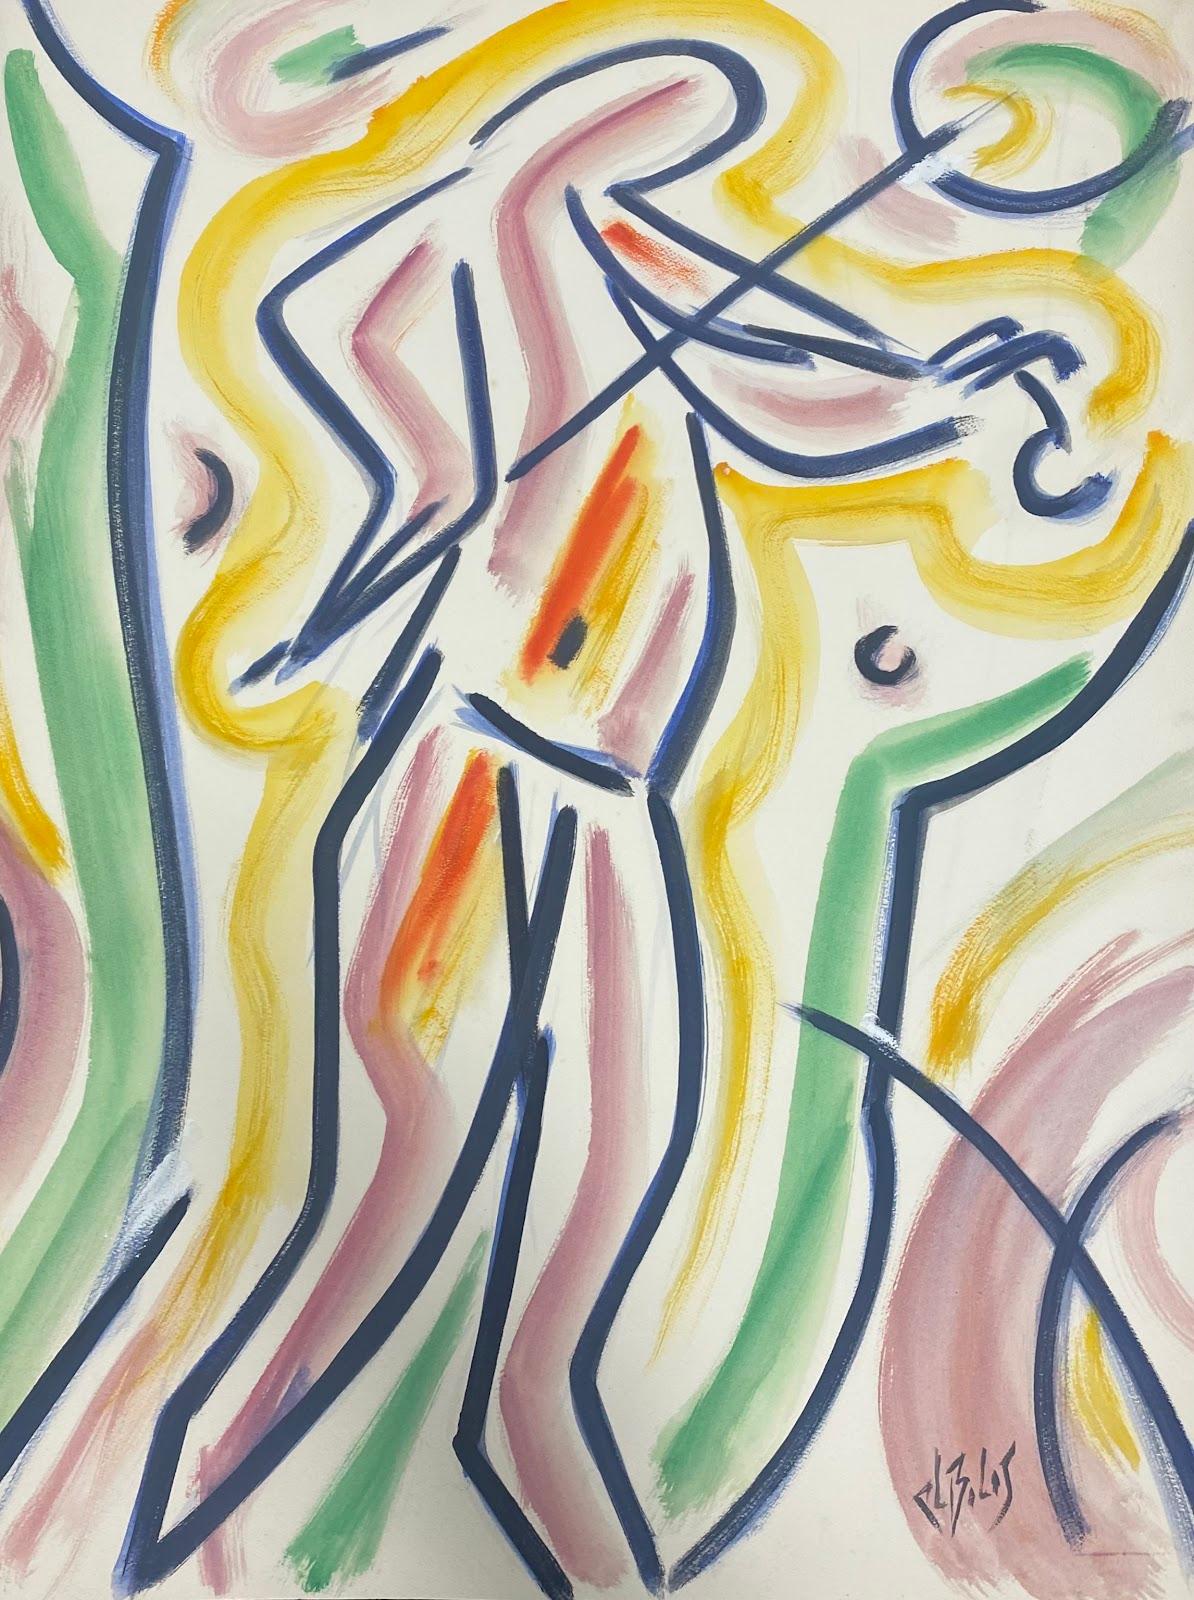 Paul-Louis Bolot (French 1918-2003) Figurative Painting - 1980's French Modernist Painting Amusing Multi-color Abstract Figure with Violin